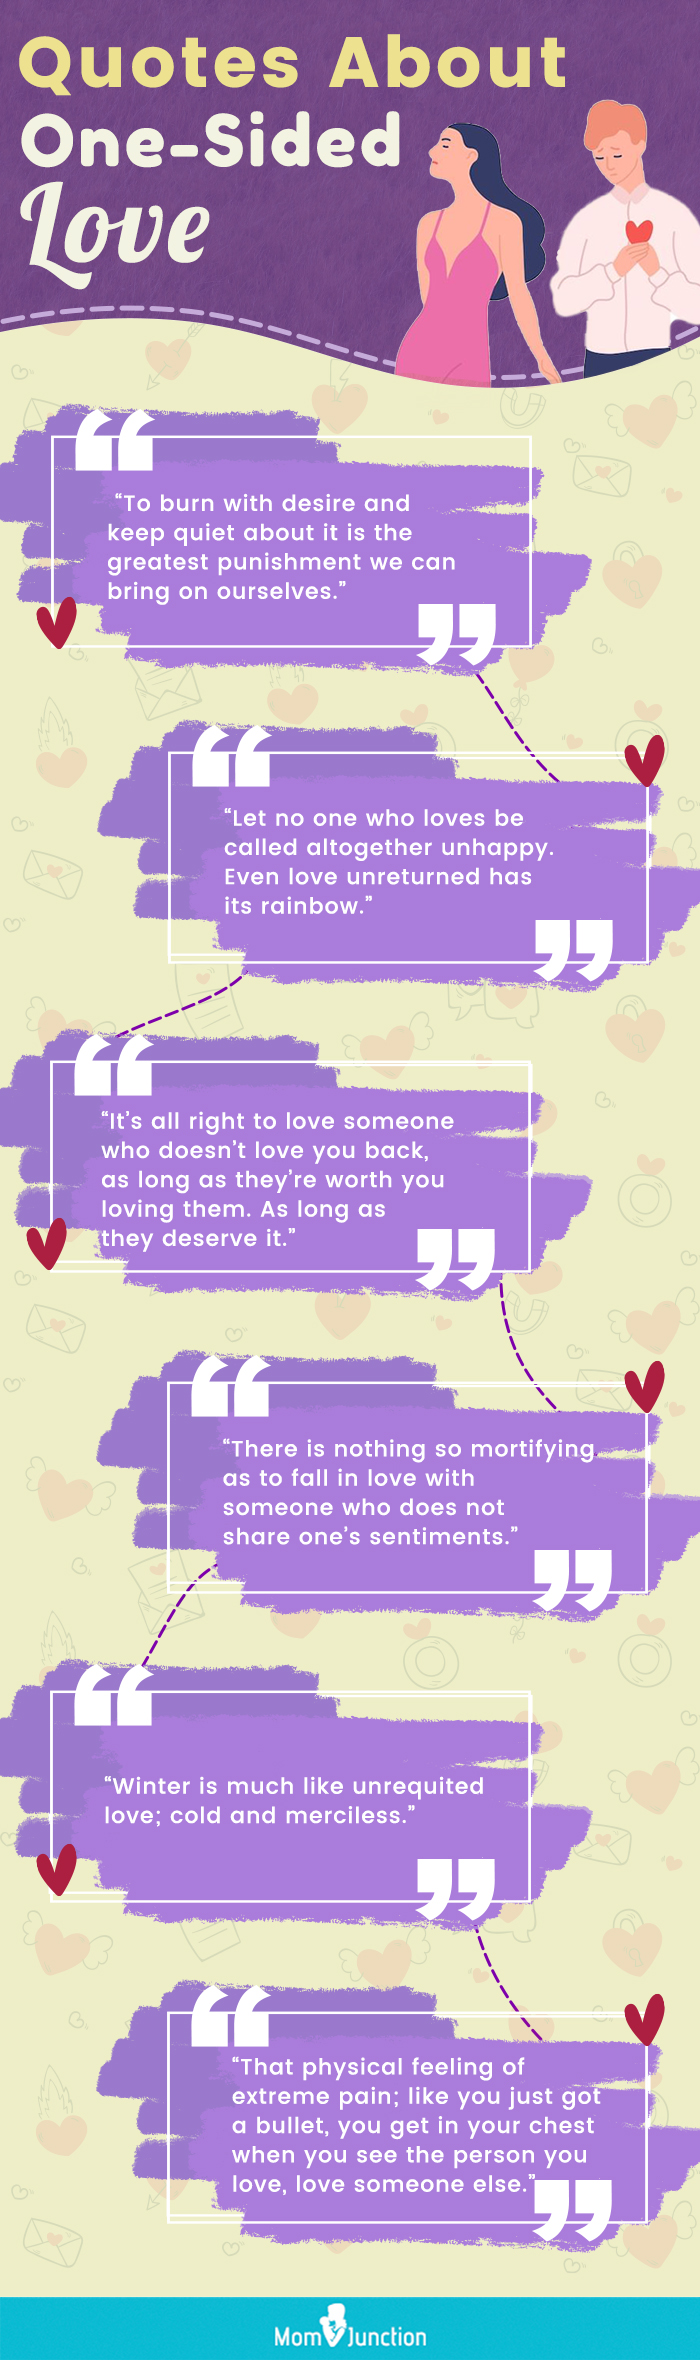 75 Loving-Someone-Who-Doesn't-Love-You-Back Quotes